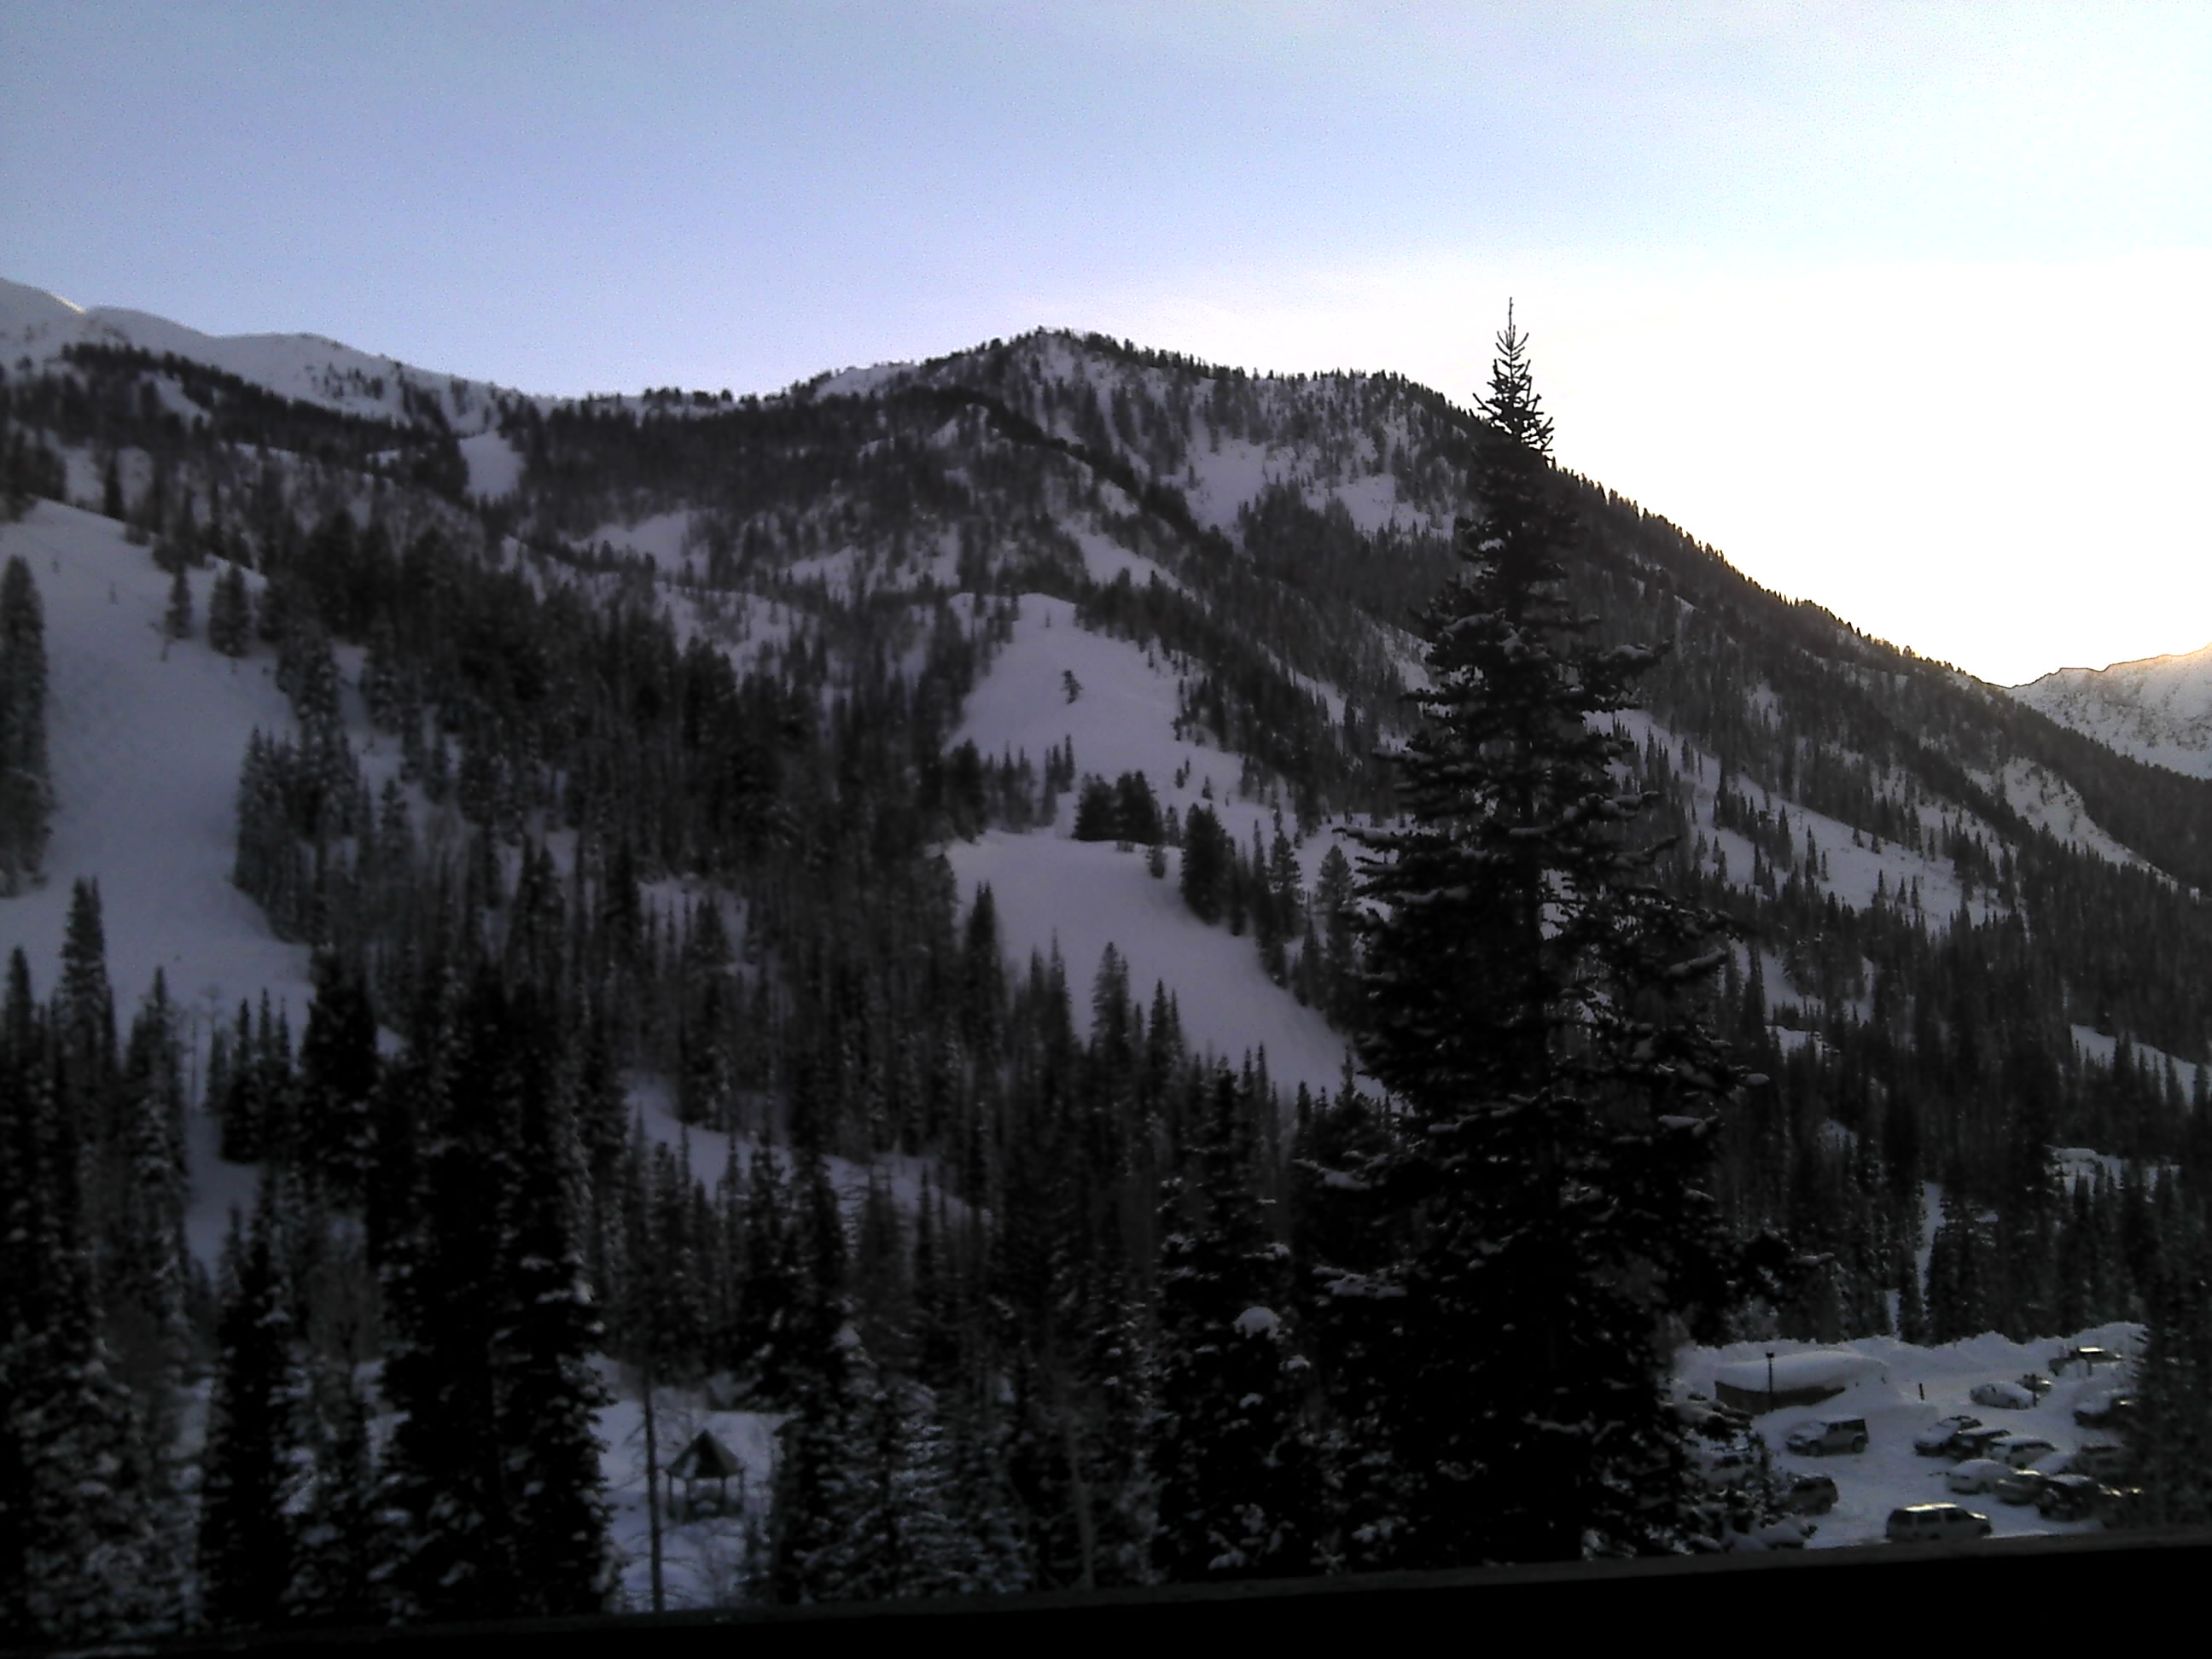 Another Peachy day in the Wasatch Mtns. Utah, Alta